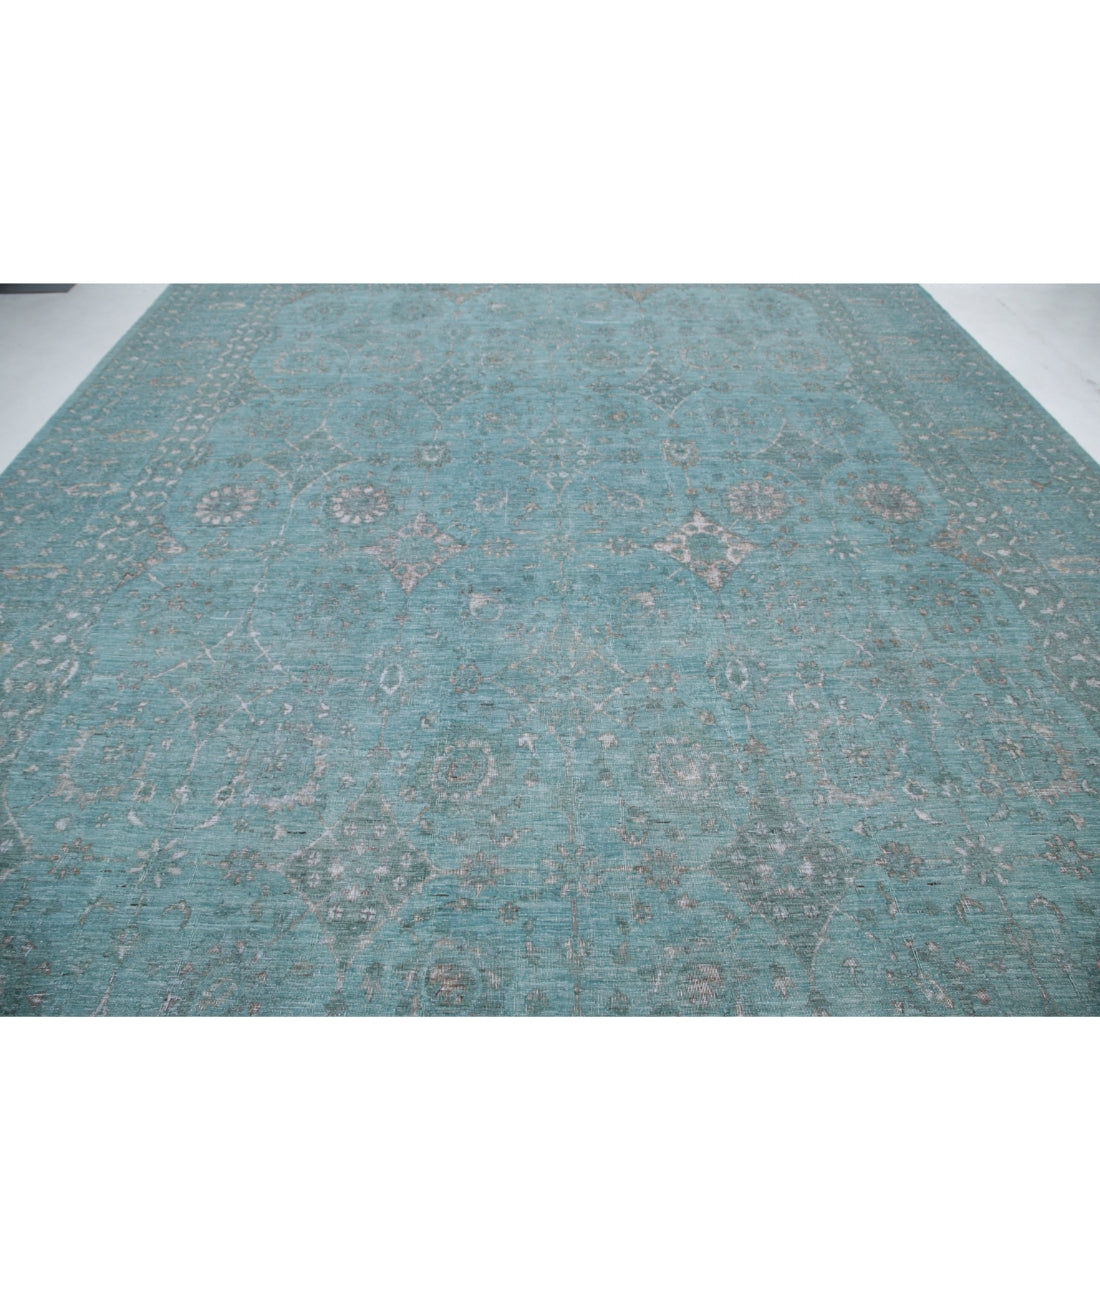 Hand Knotted Onyx Wool Rug - 12'0'' x 14'9'' 12'0'' x 14'9'' (360 X 443) / Green / Blue